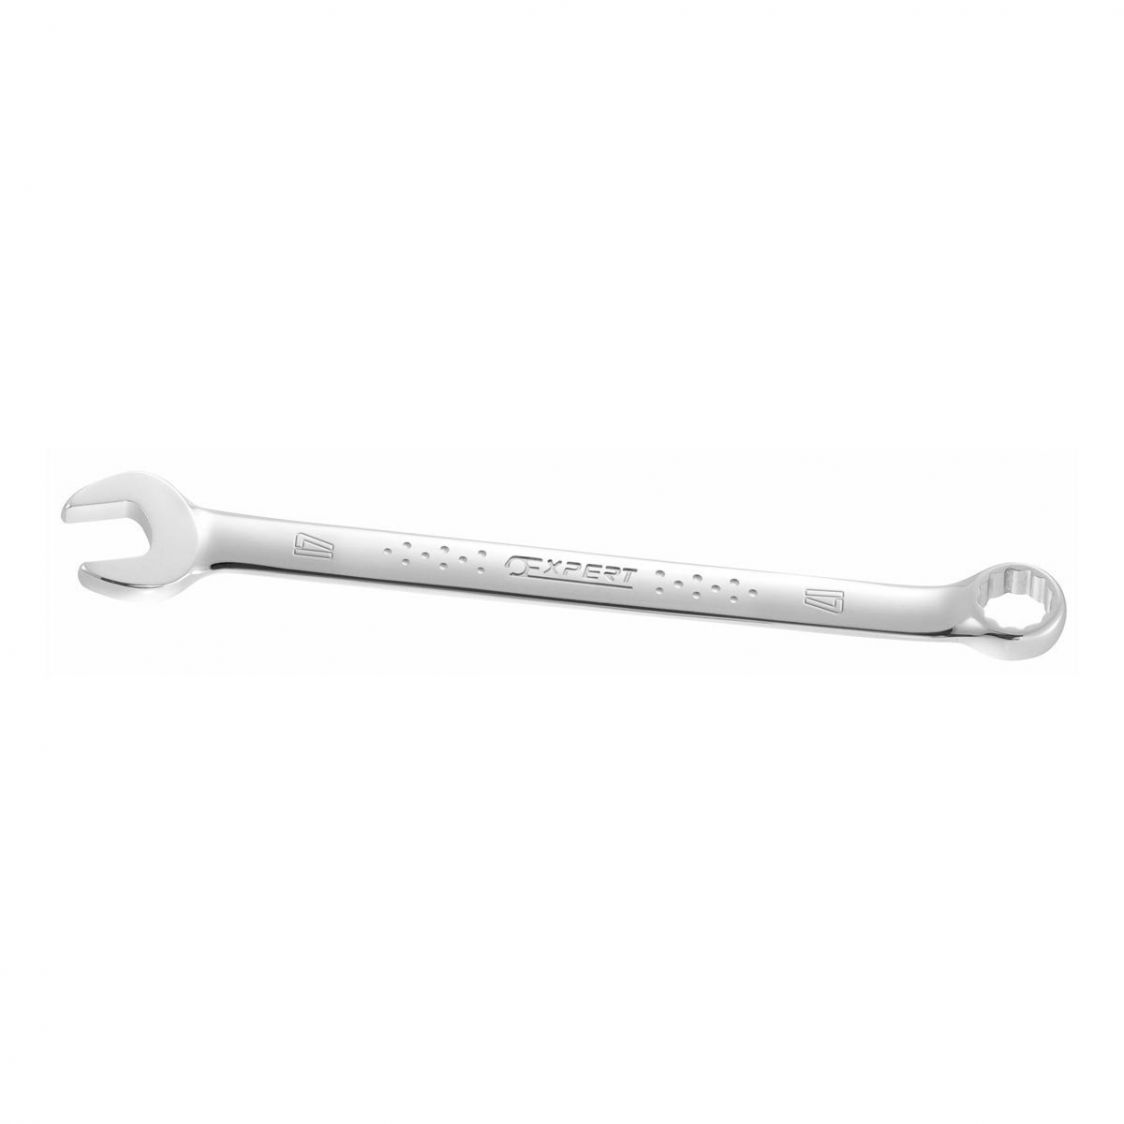 EXPERT by FACOM E117707 - 28mm Metric Long Combination Spanner